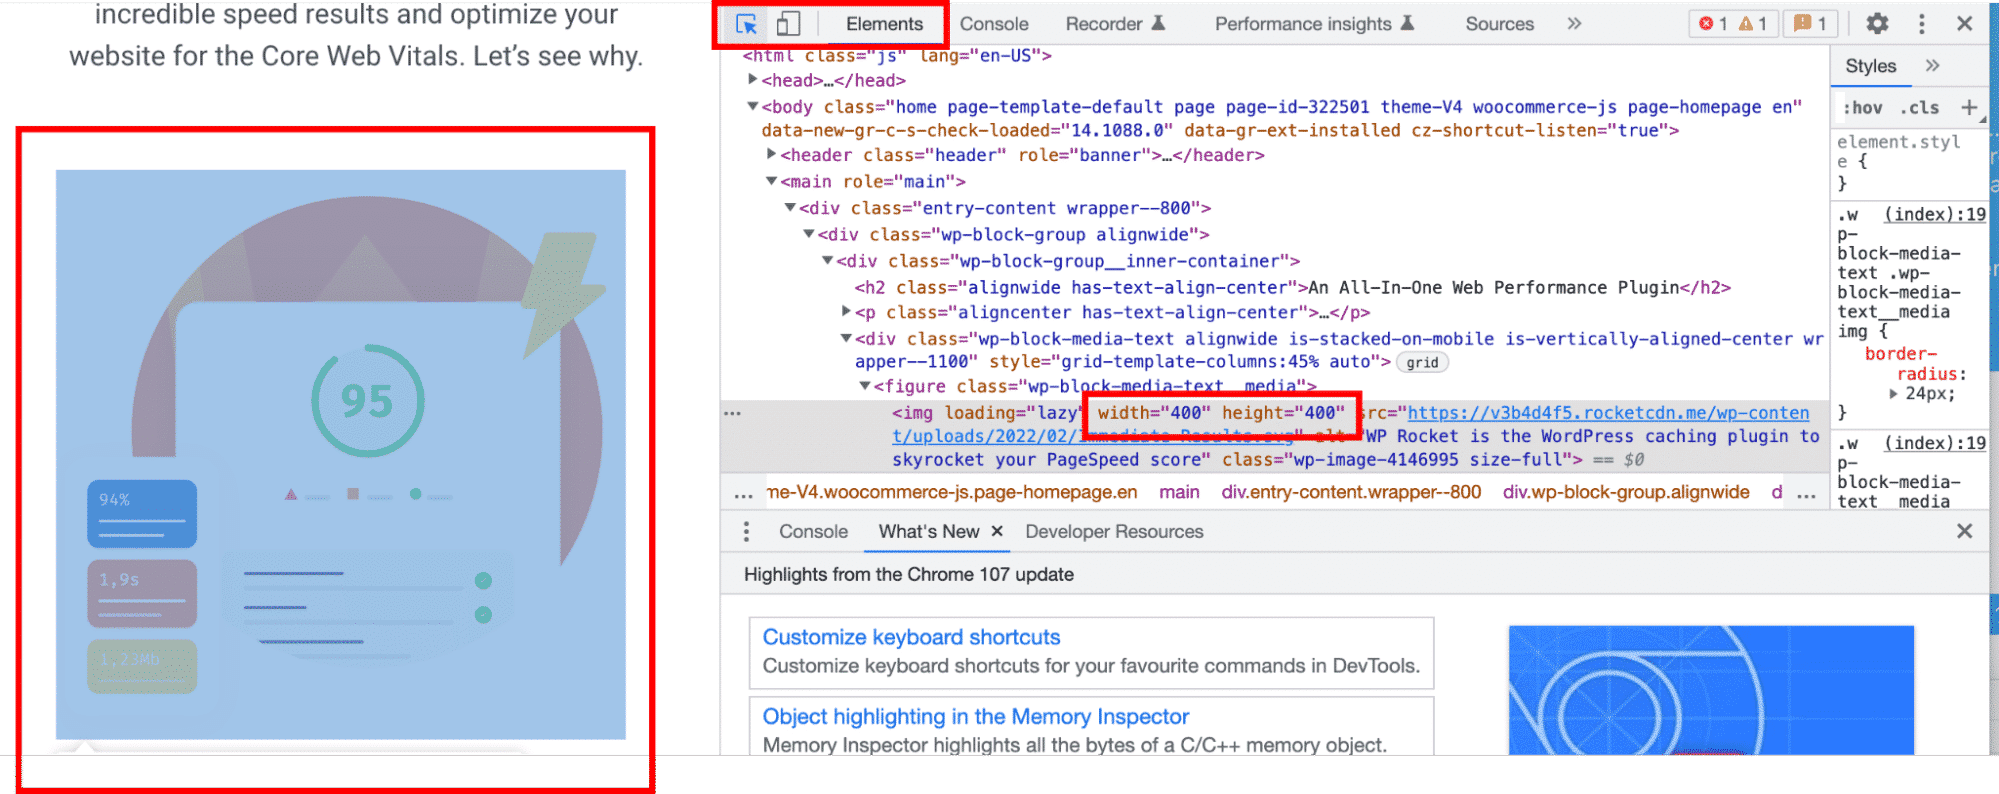 Identifying my image size from the “Elements” tab - Source: Chrome DevTools